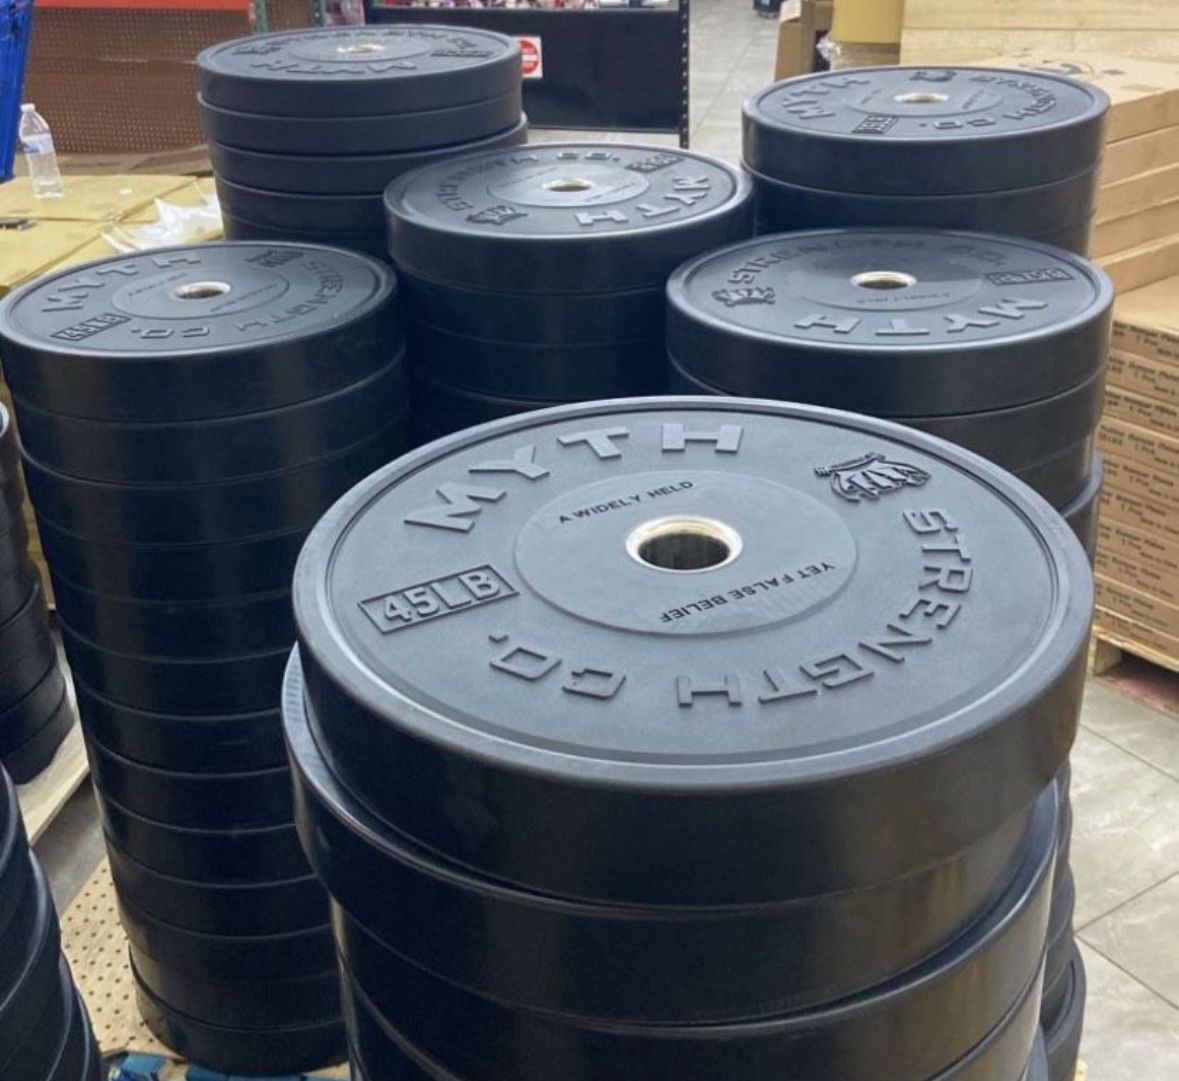 Bumper Plates, Olympic Weight Plates, Change Plates, Barbells, Lifting Olympic Bars For Sale